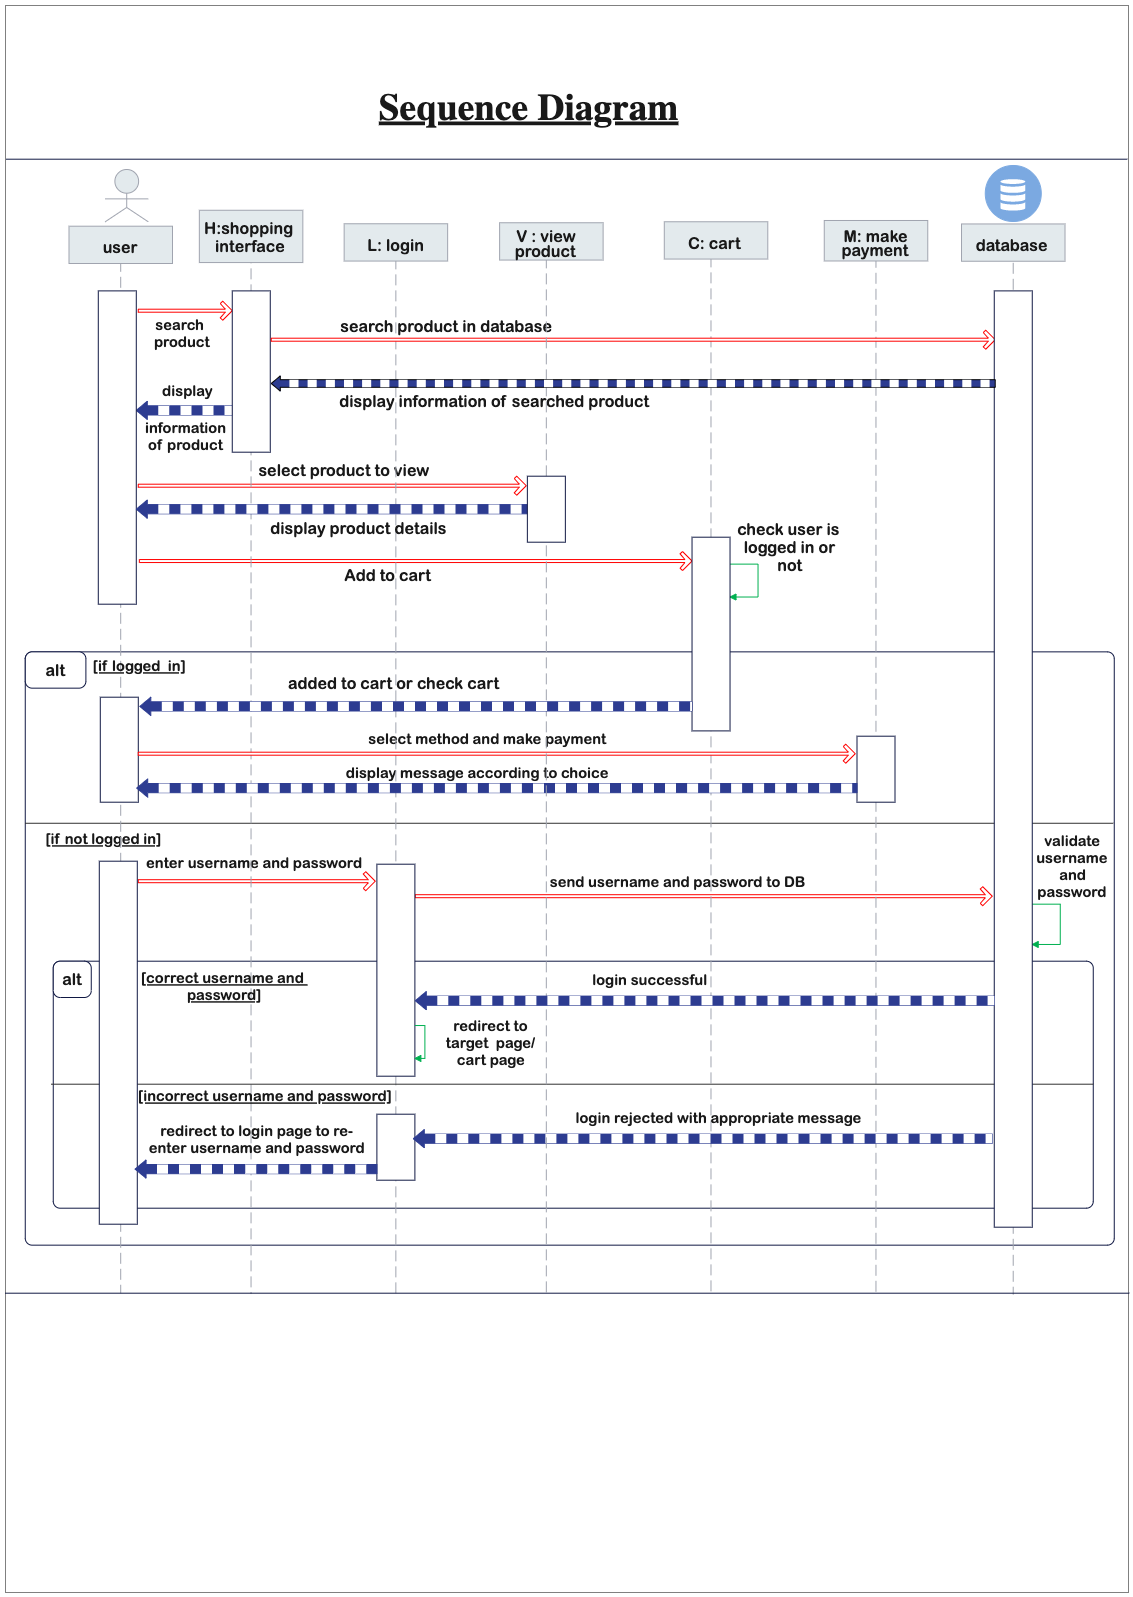 Sequence Diagram for Online eCommerce Retail Store